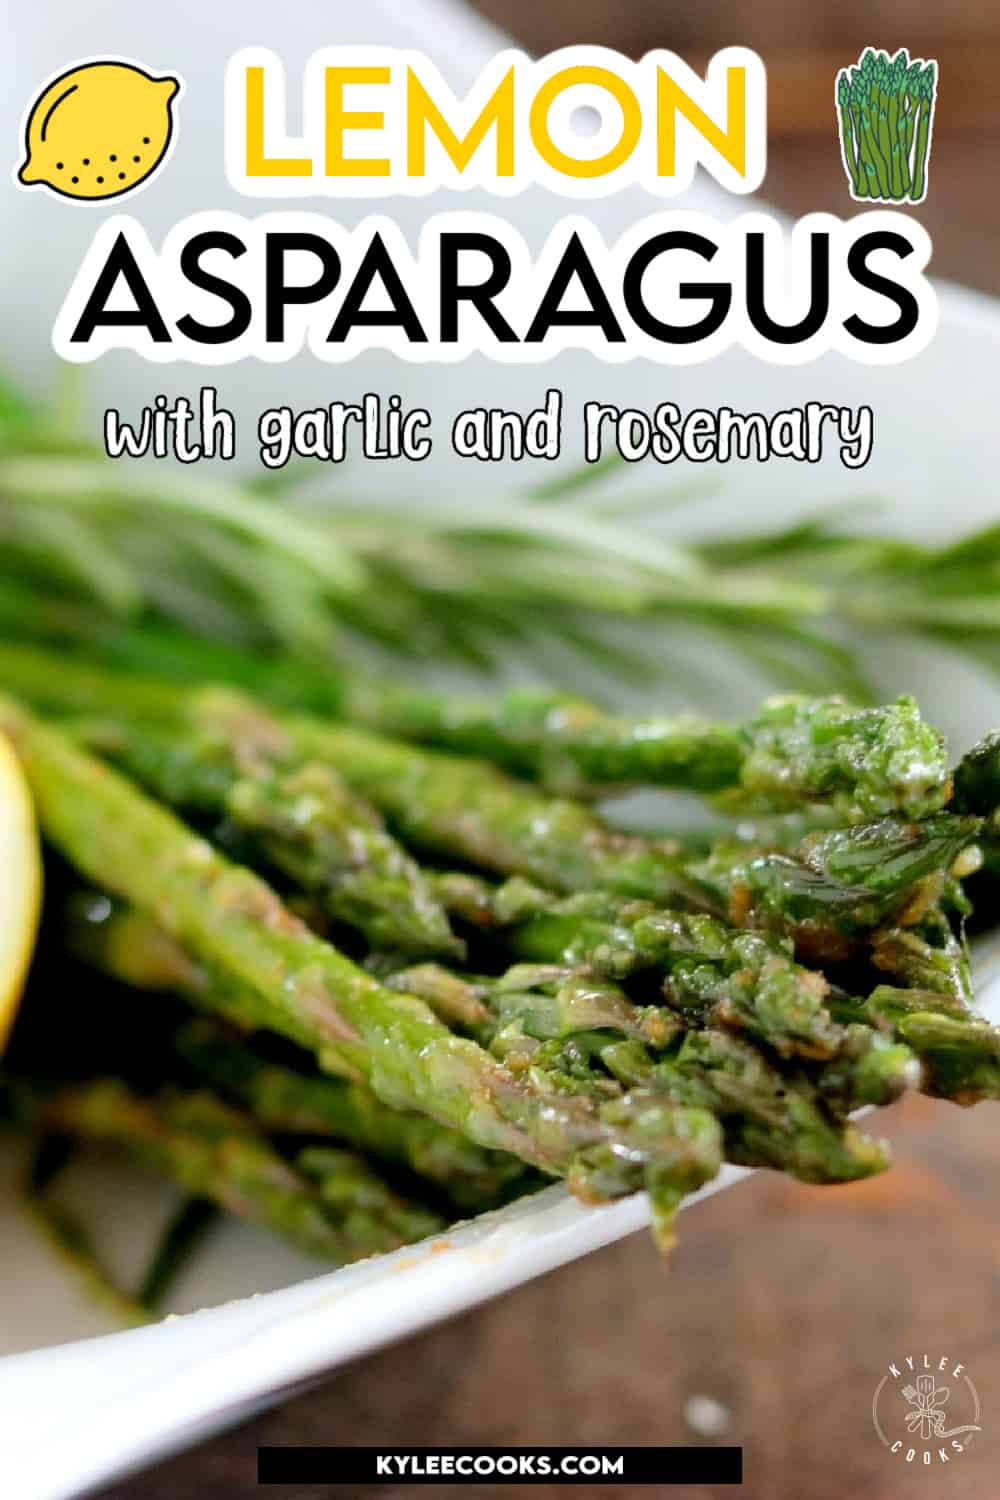 asparagus with lemon and rosemary in a white dish, with recipe name overlaid in text.